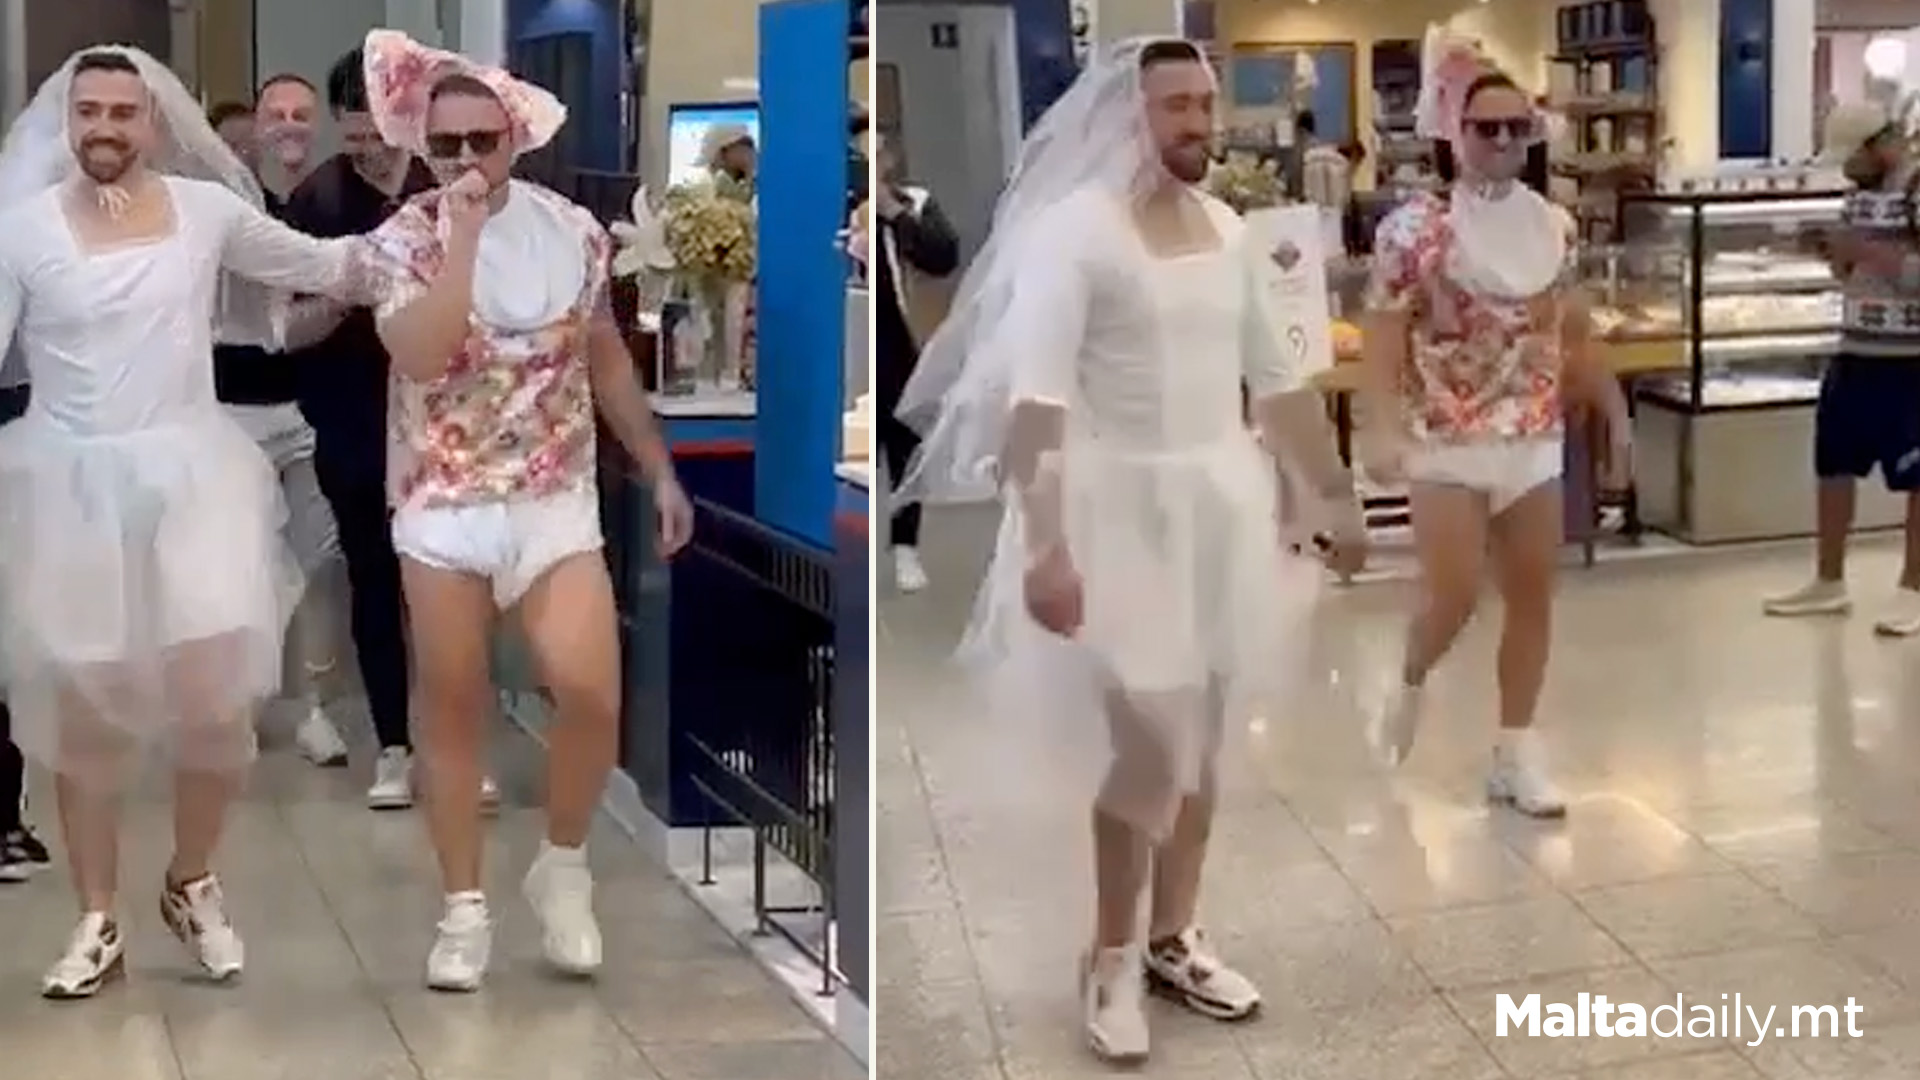 Men Dressed As Bride & Toddler At Airport For Bachelor's